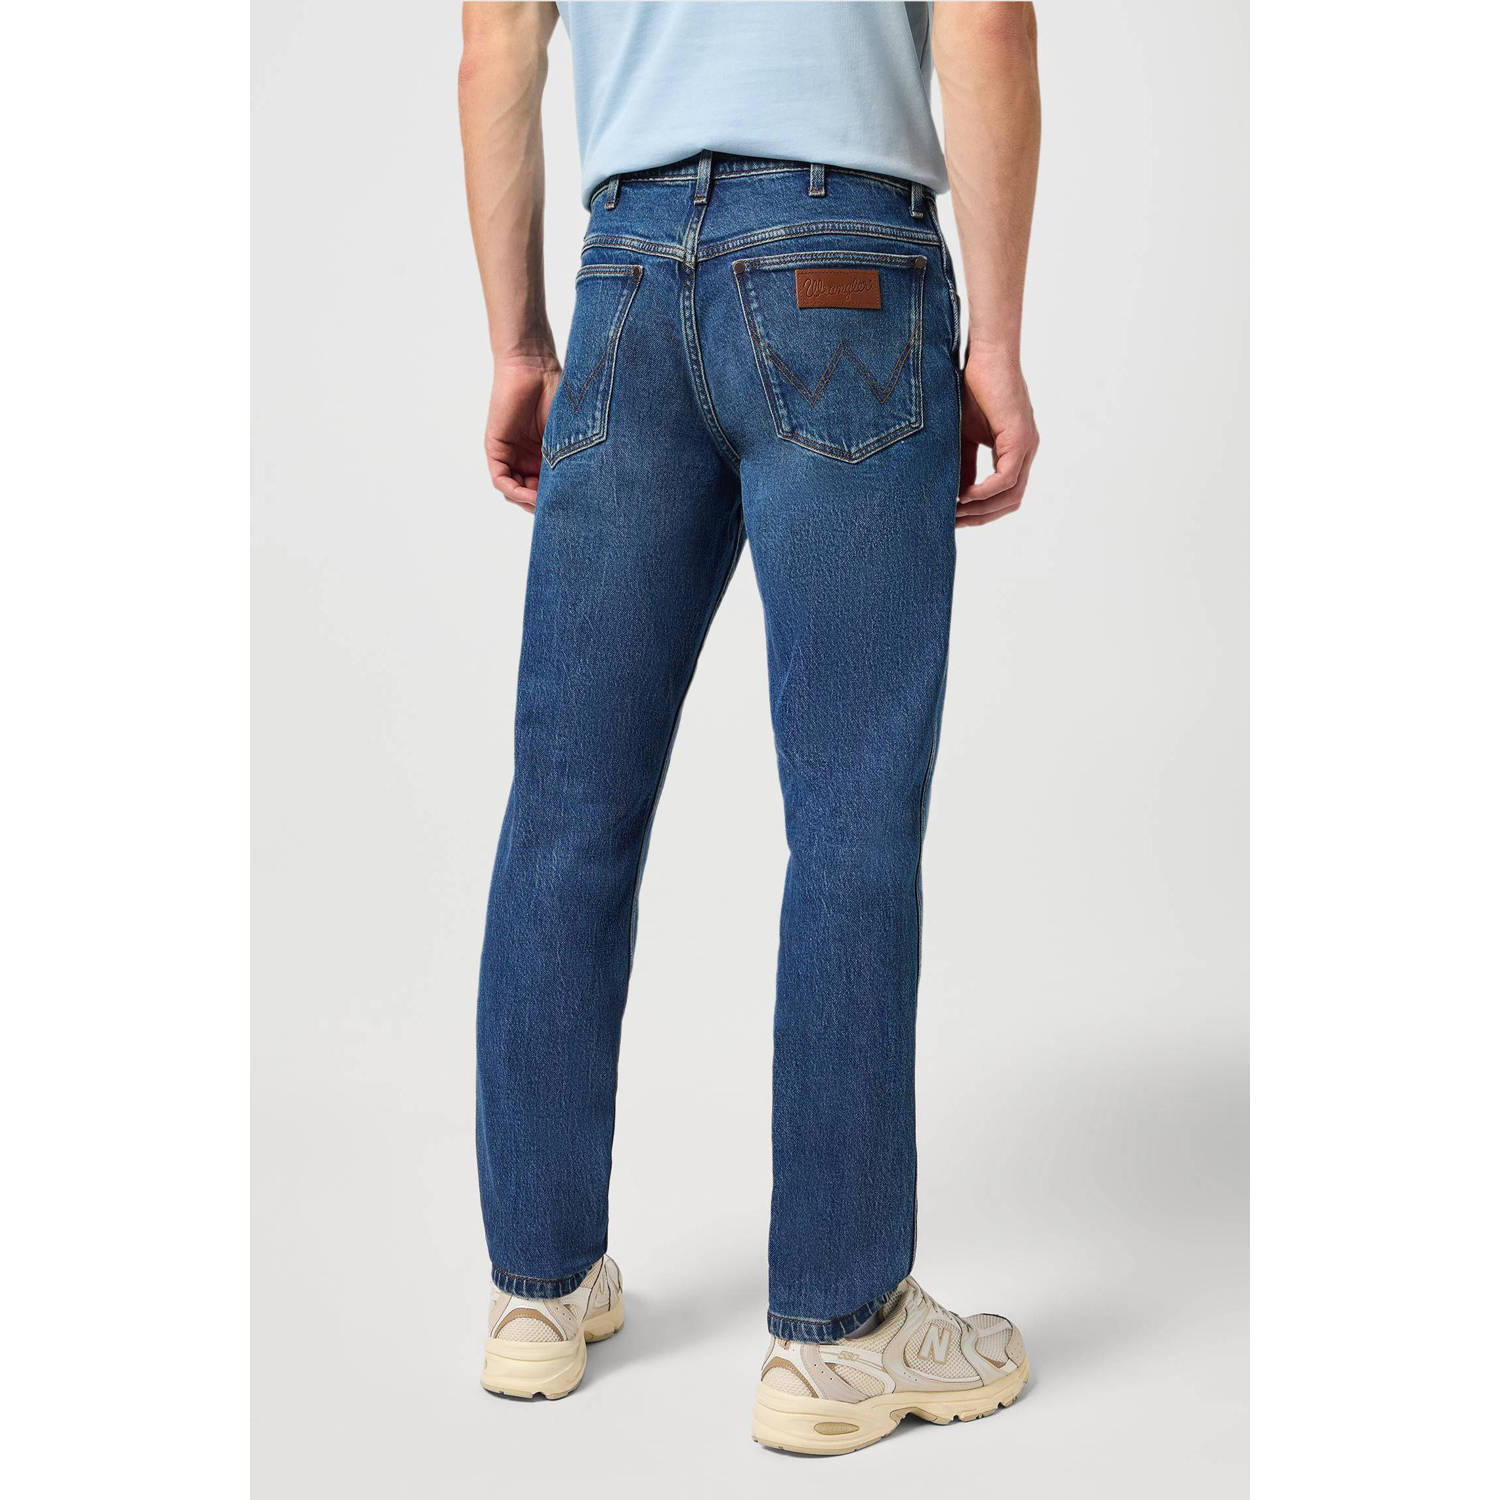 Wrangler regular fit jeans River seeing double